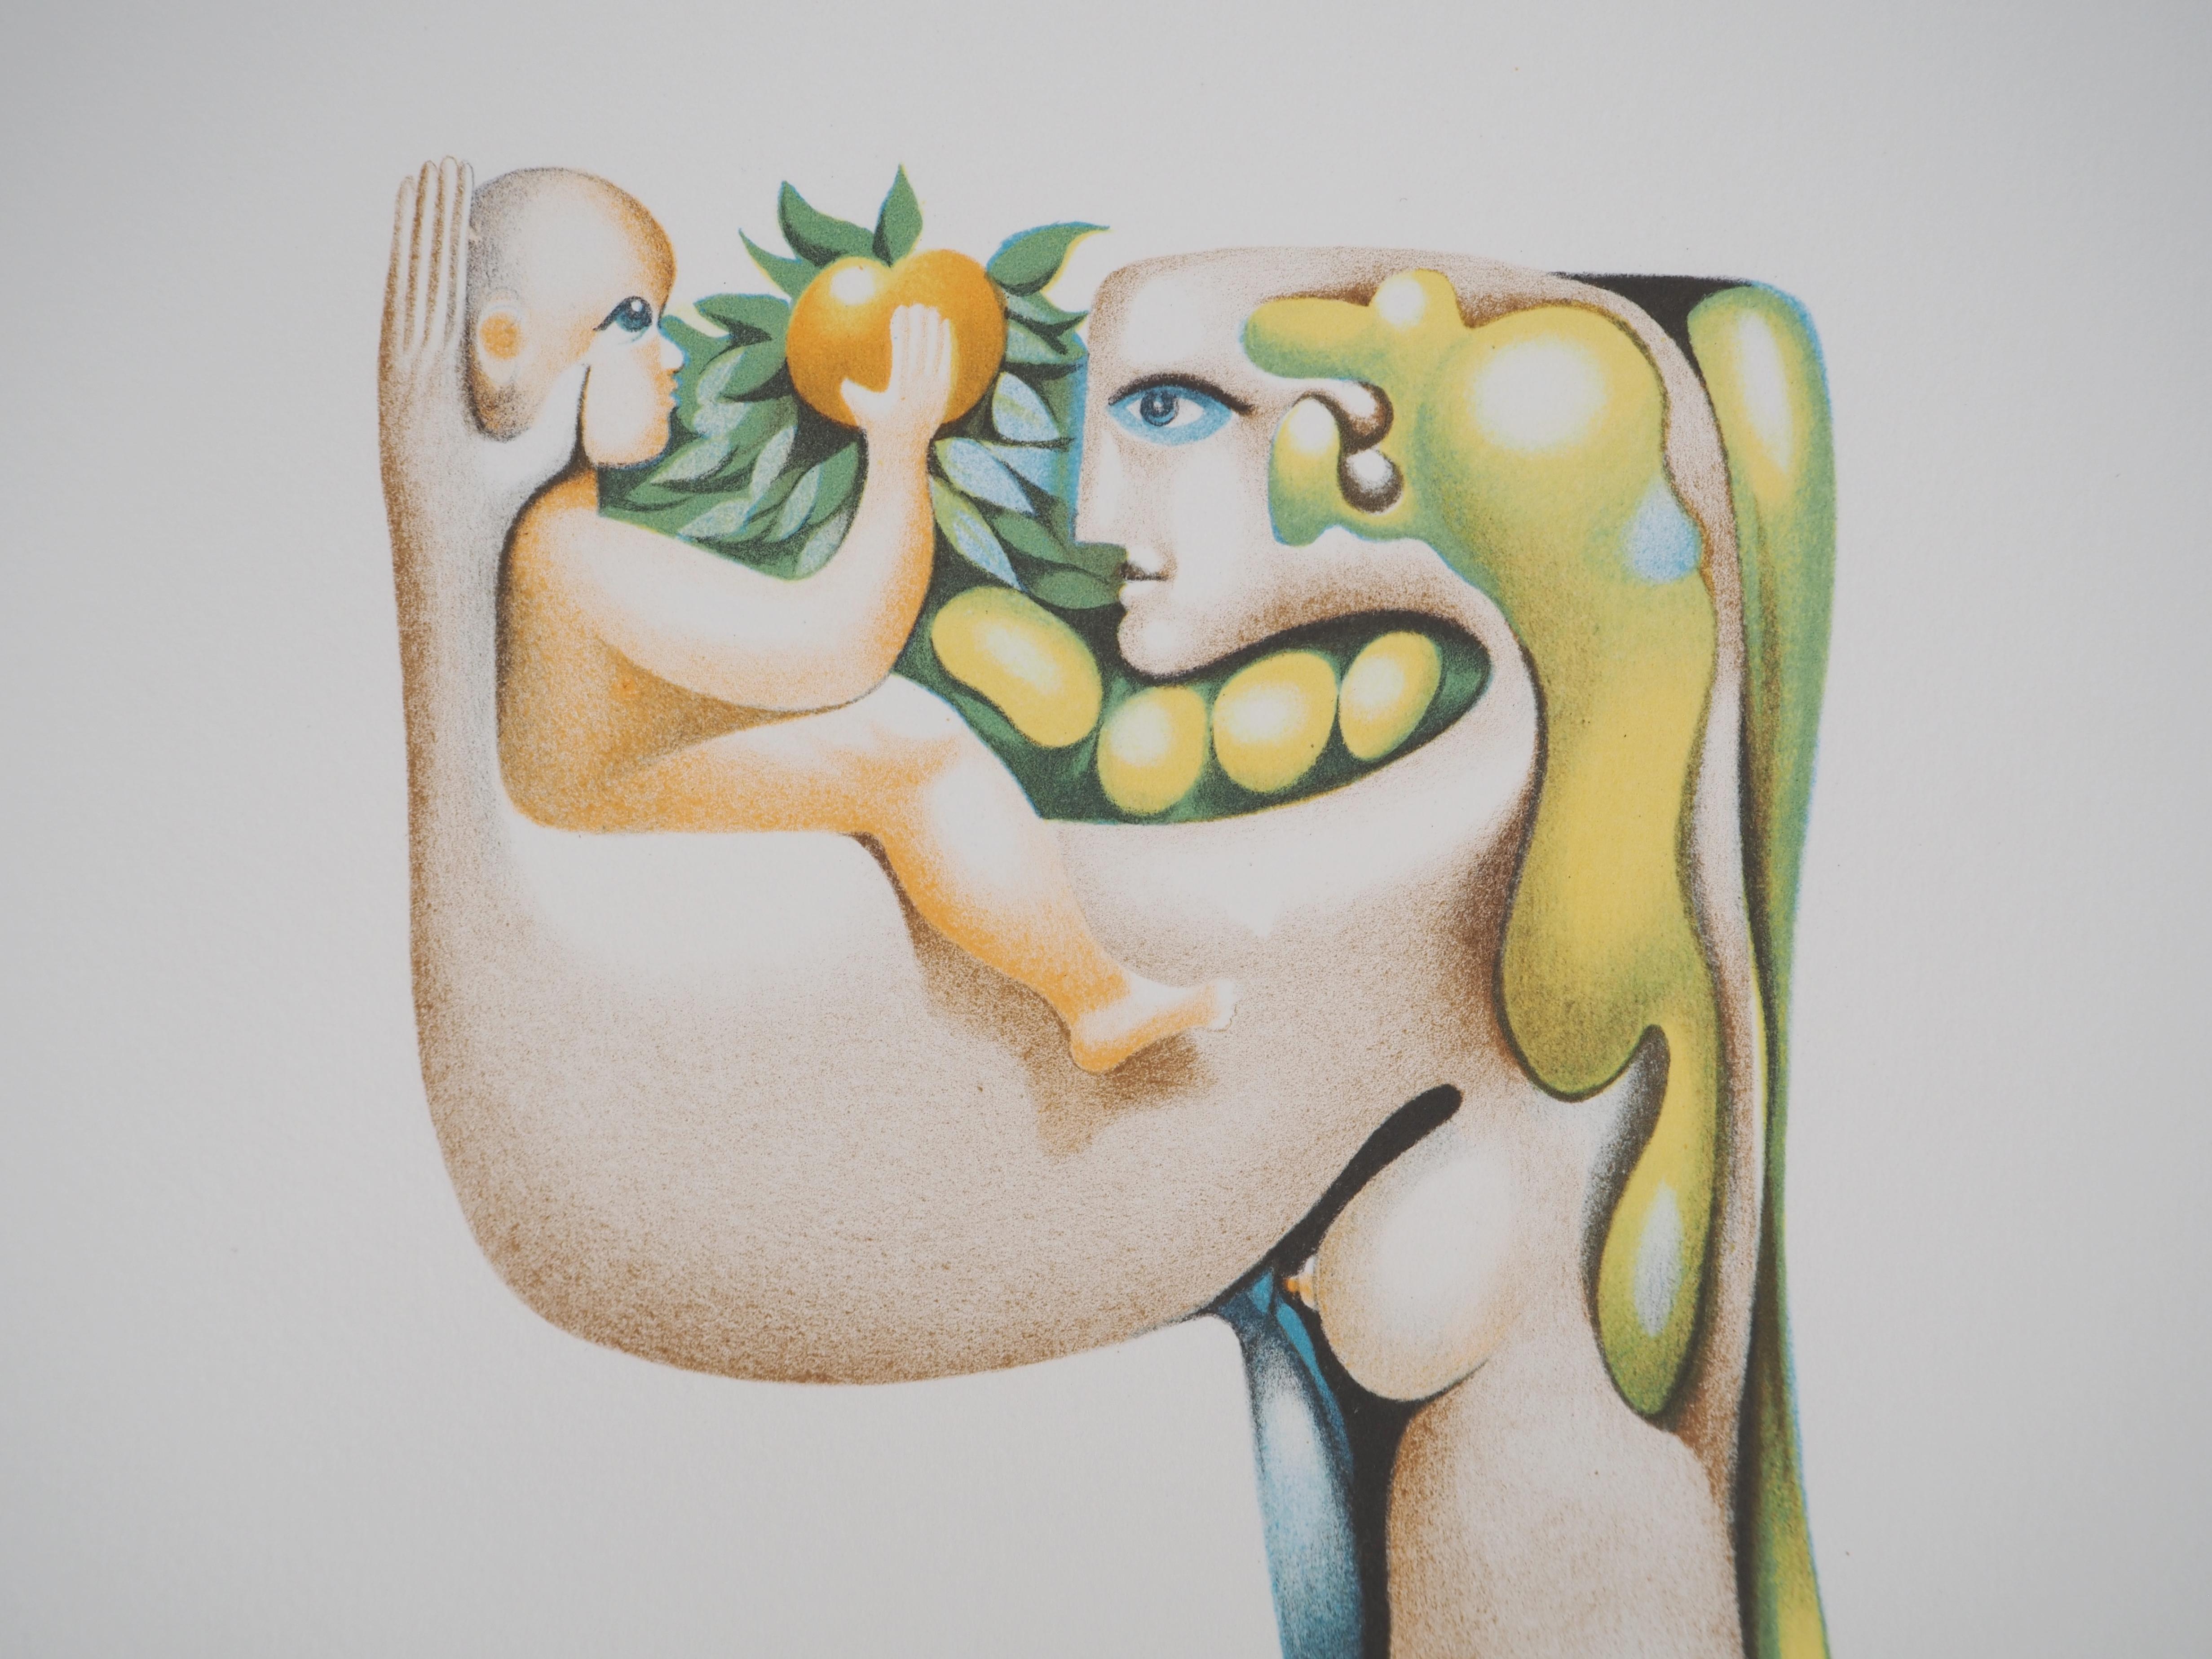 Mystic Maternity : Child with an Apple - Original lithograph, Signed - Gray Figurative Print by Jules PERAHIM